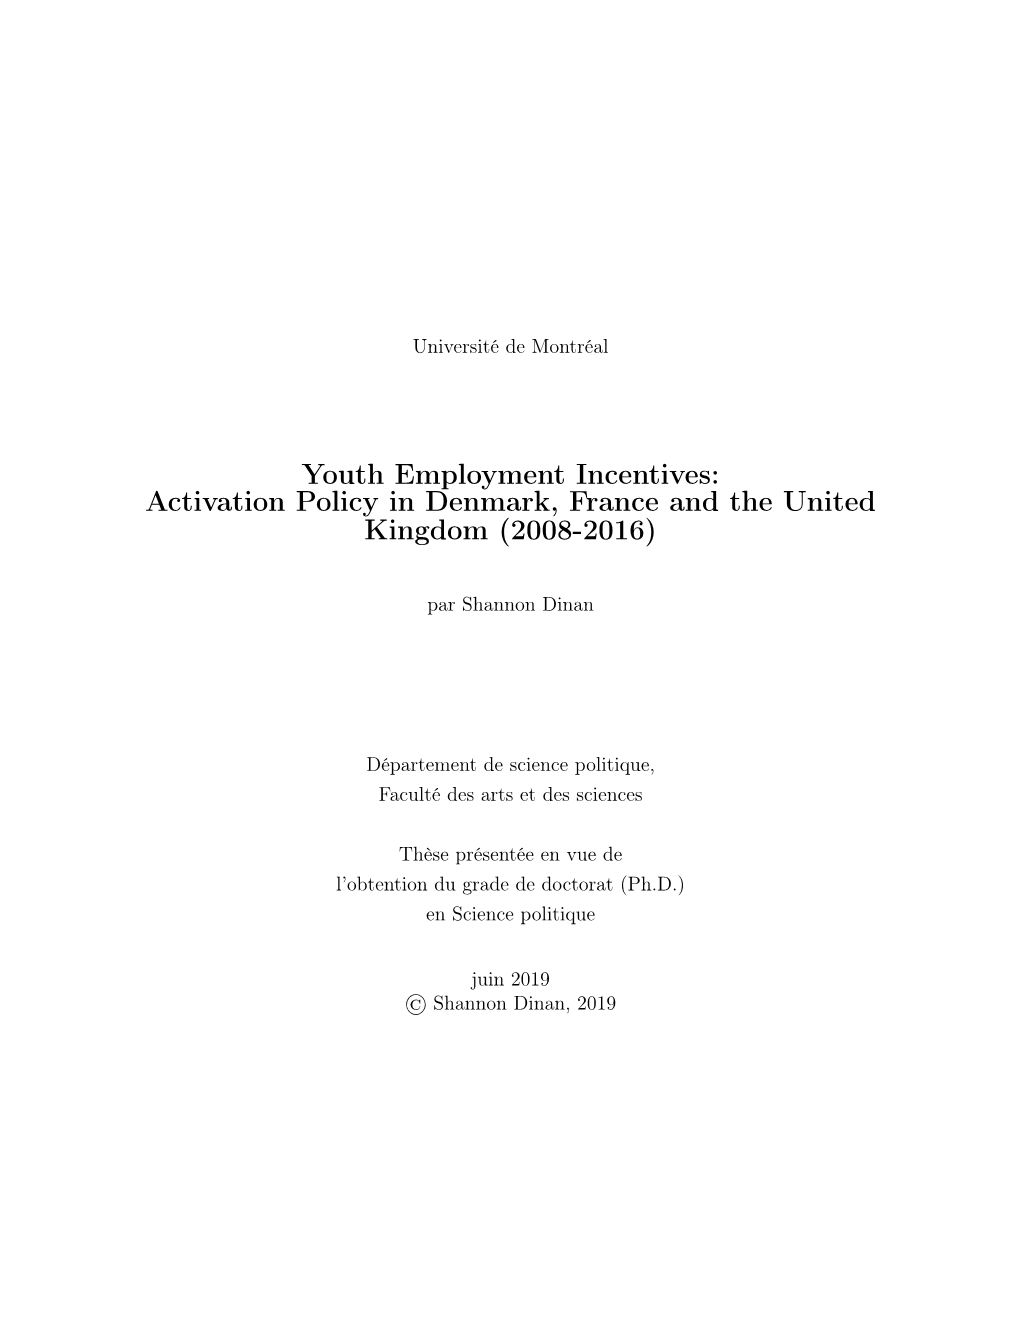 Youth Employment Incentives: Activation Policy in Denmark, France and the United Kingdom (2008-2016)